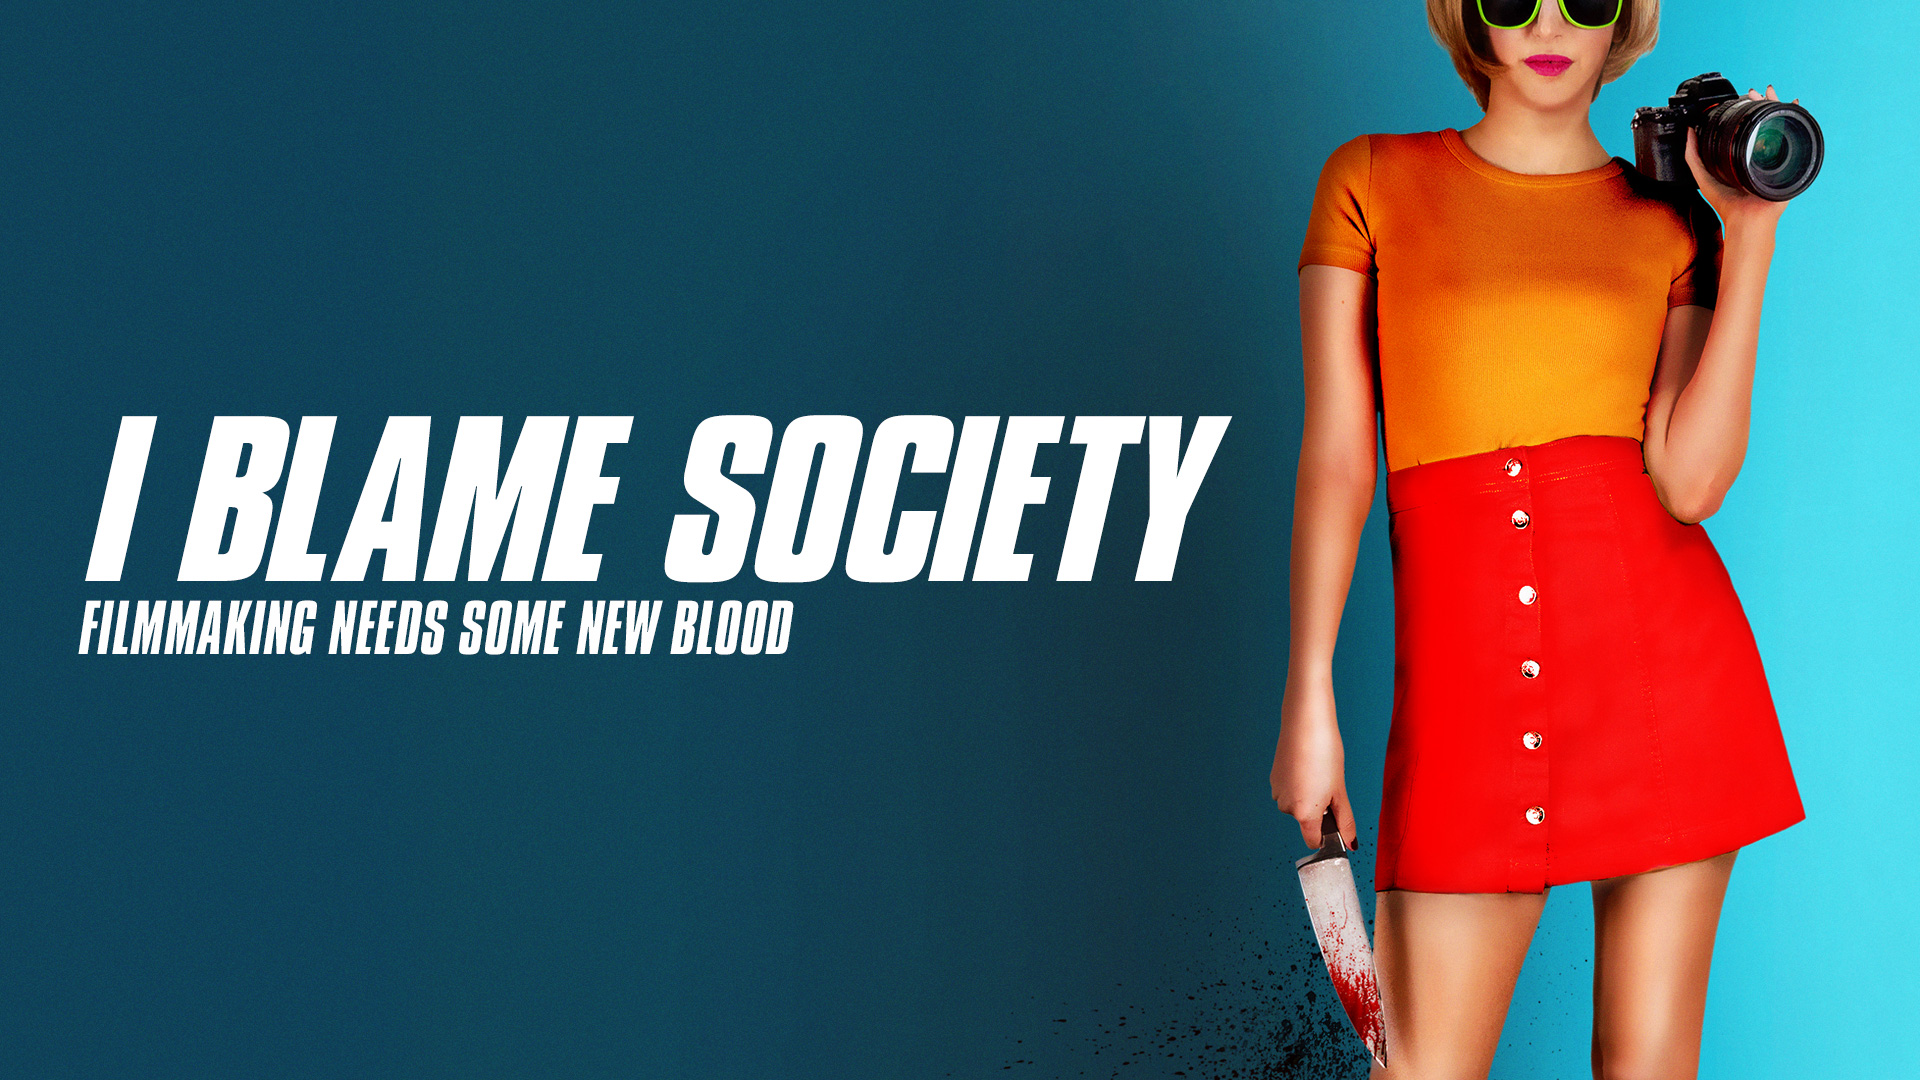 I Blame Society In Theaters And On Demand Feb 12 Serial Killer Comedy Cranked Up Films